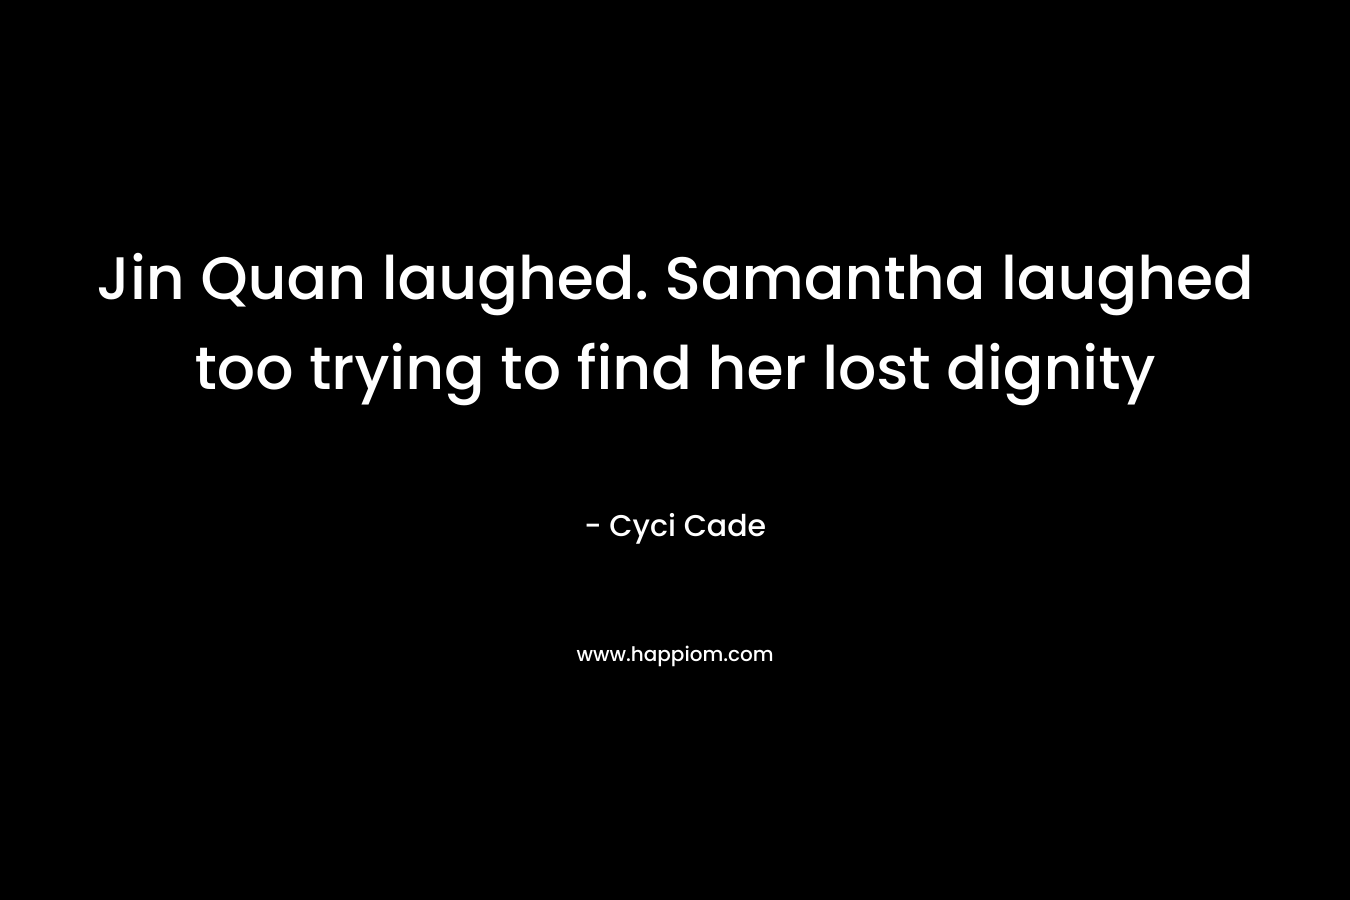 Jin Quan laughed. Samantha laughed too trying to find her lost dignity